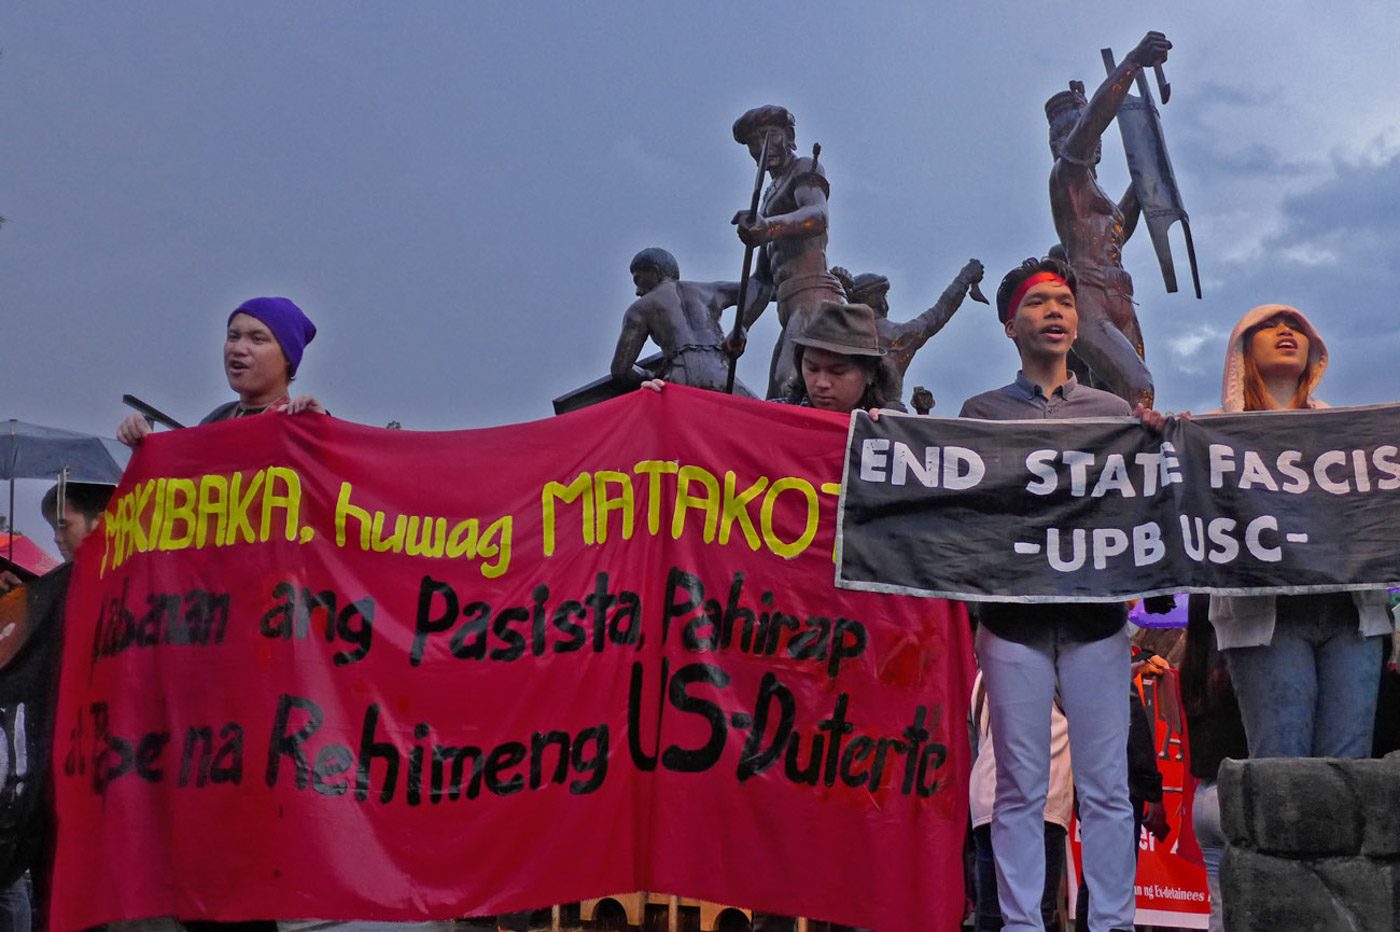 CHR: Linking schools to Red October plot endangers students